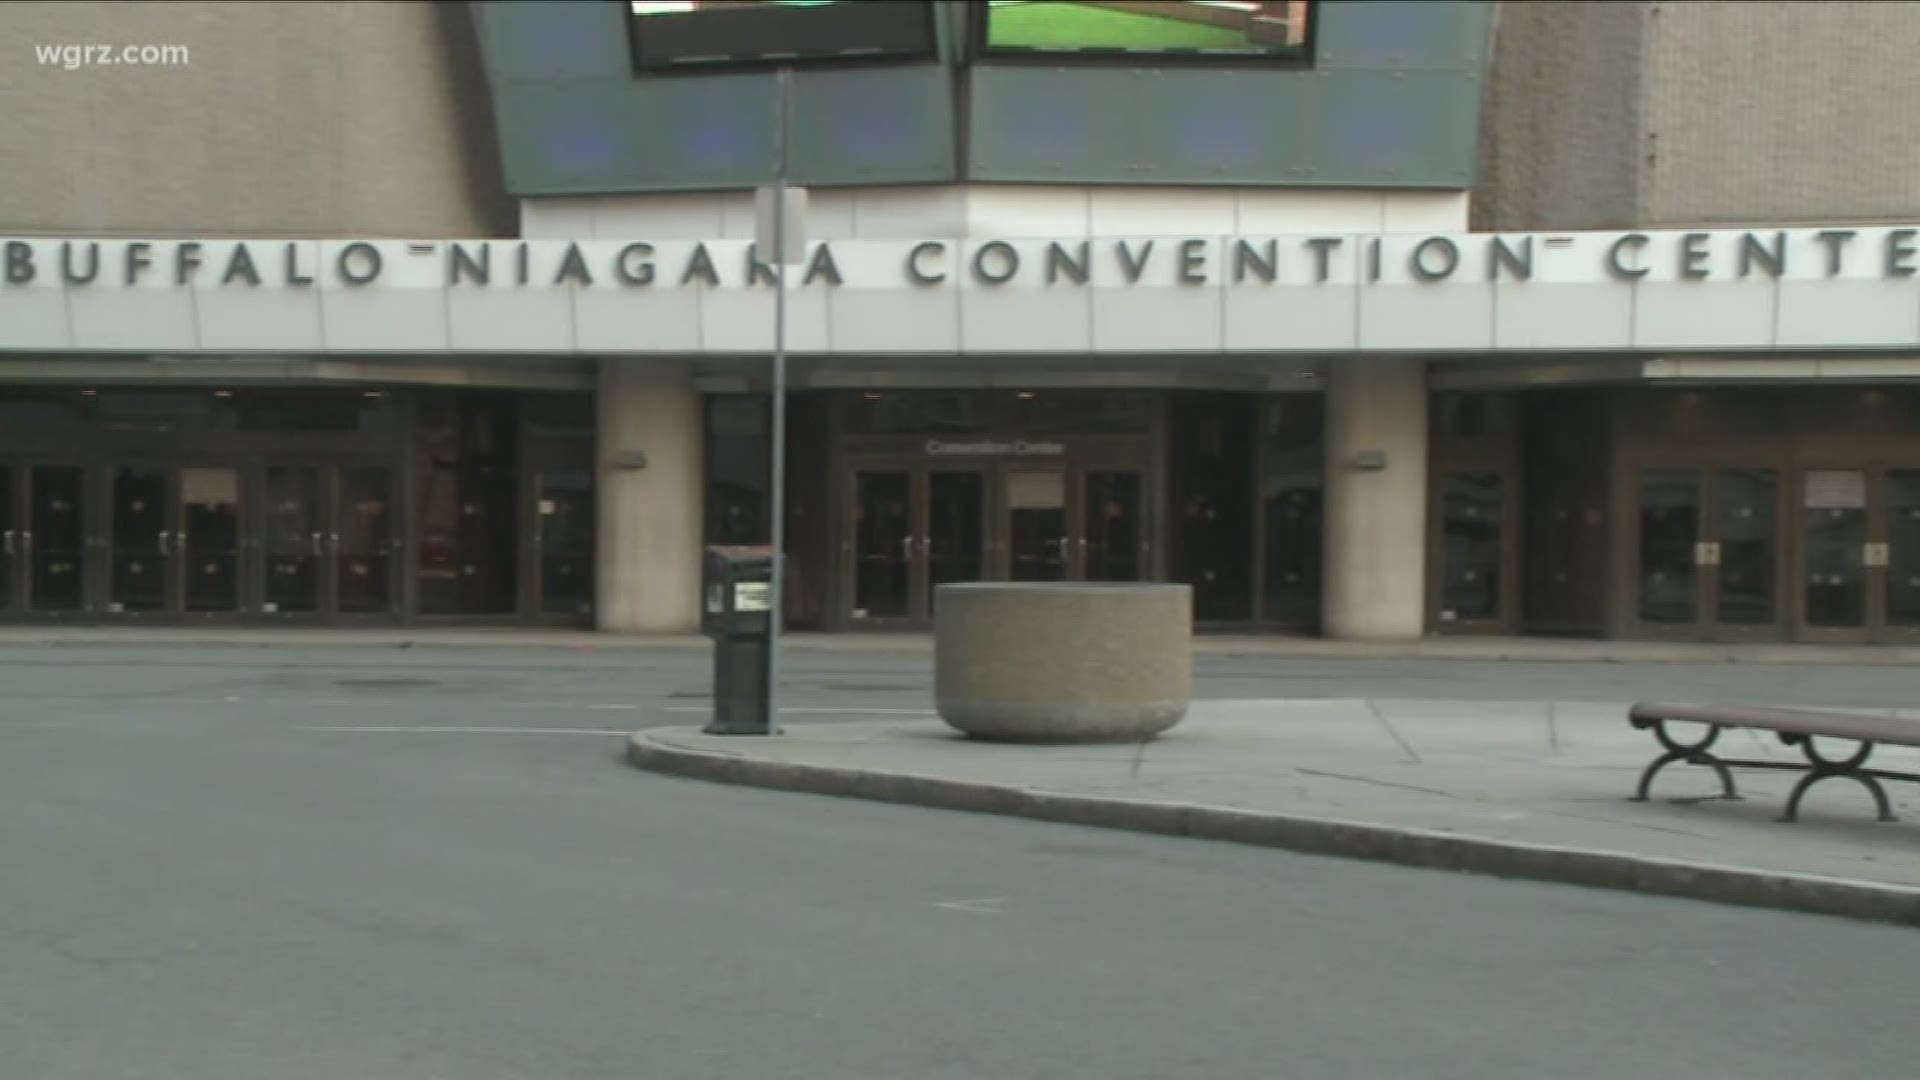 Erie County is looking at a number of locations that could possibly be turned into make-shift hospitals, one of them being the Buffalo Niagara Convention Center.